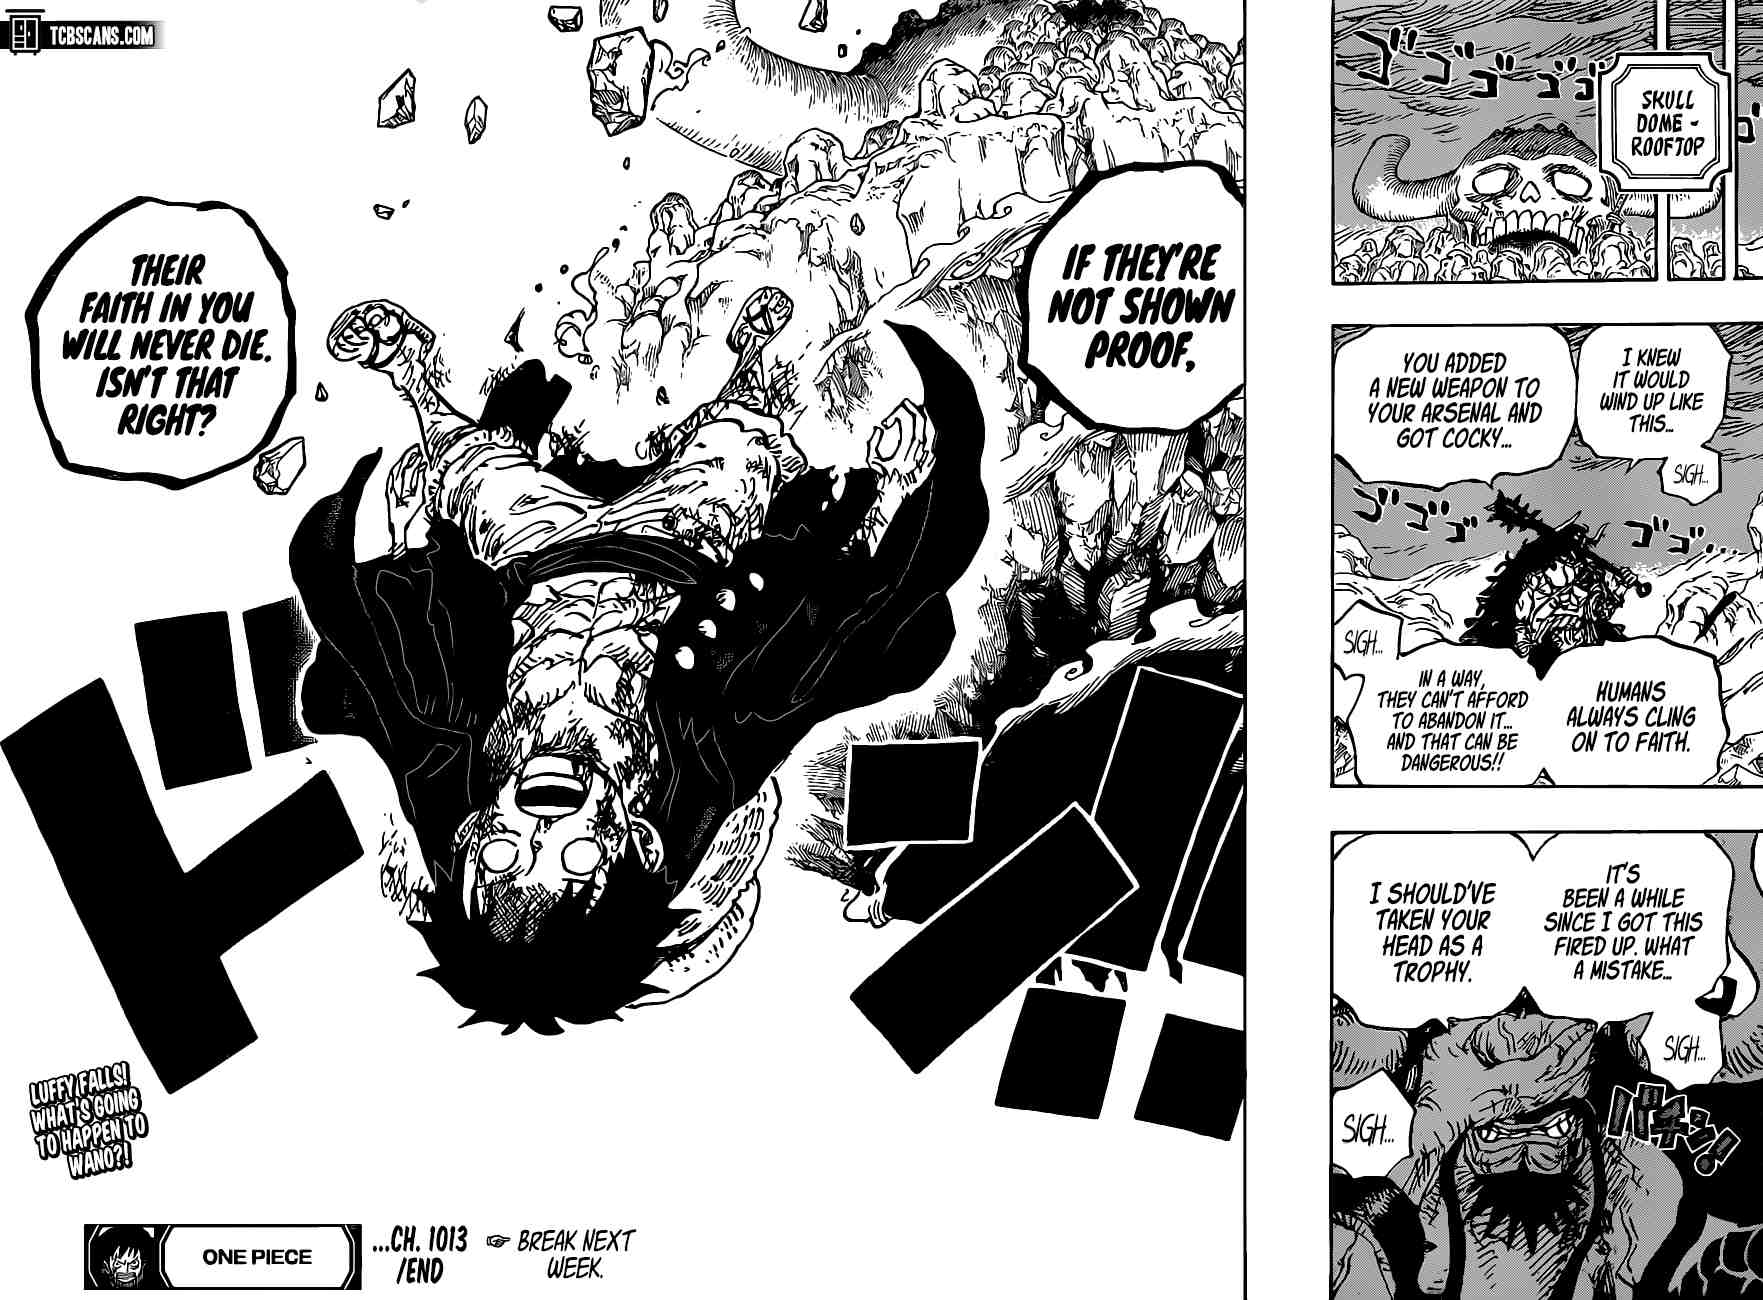 One PieceOne Piece, Chapter 1013 image 15